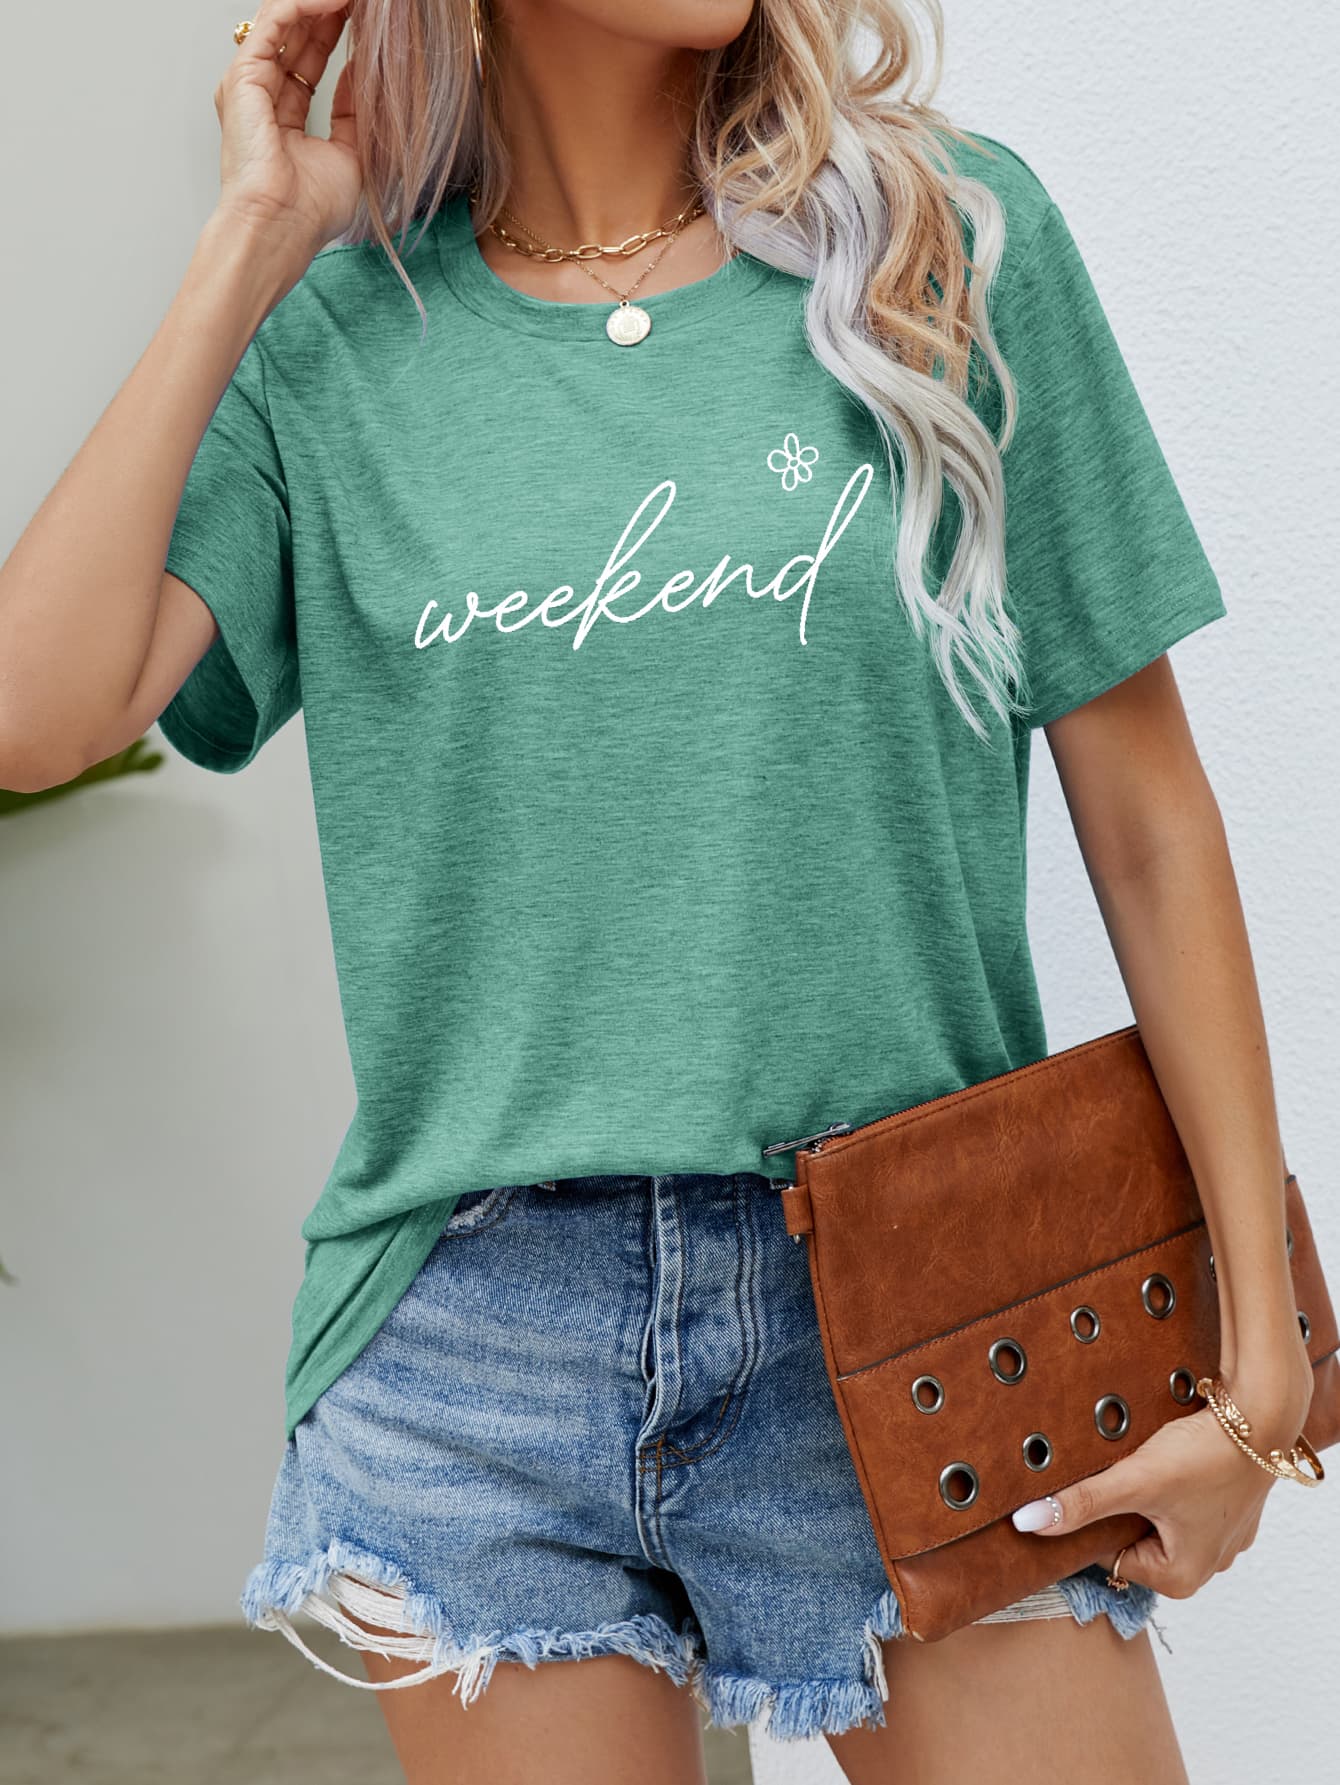 WEEKEND Flower Graphic Short Sleeve Tee - Green / S - T-Shirts - Shirts & Tops - 10 - 2024